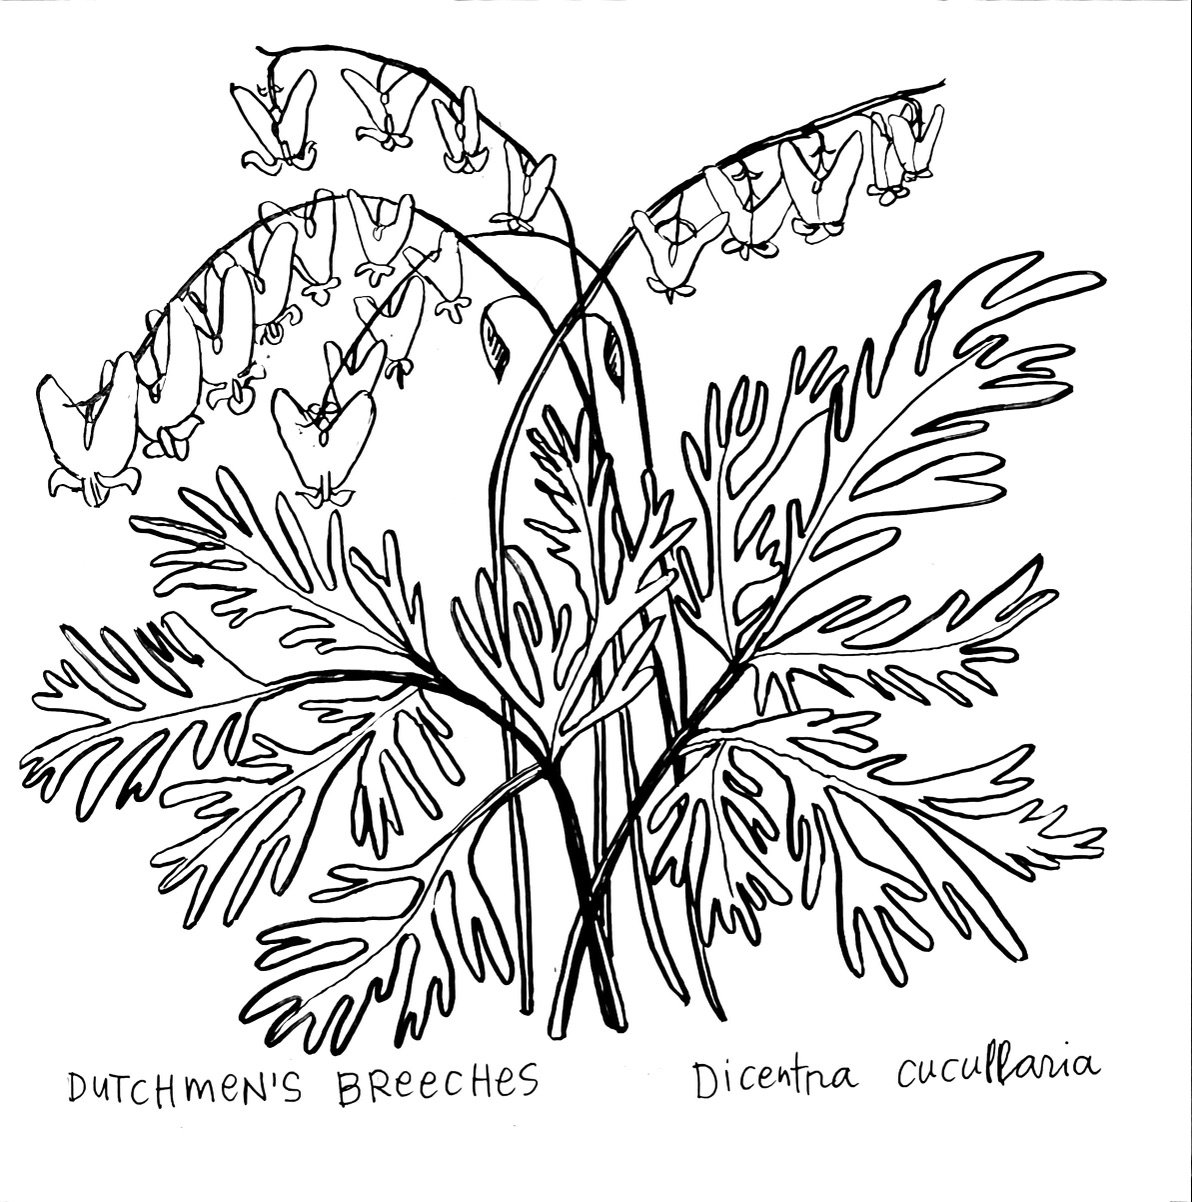 Day 8. Dutchmen's Breeches. Another spring ephemeral. I'm just crazy about these plants, which means the bar is rather high when it comes to capturing them in ink, and I'm not sure I'm done with this drawing yet. 

They do look like little pairs of p